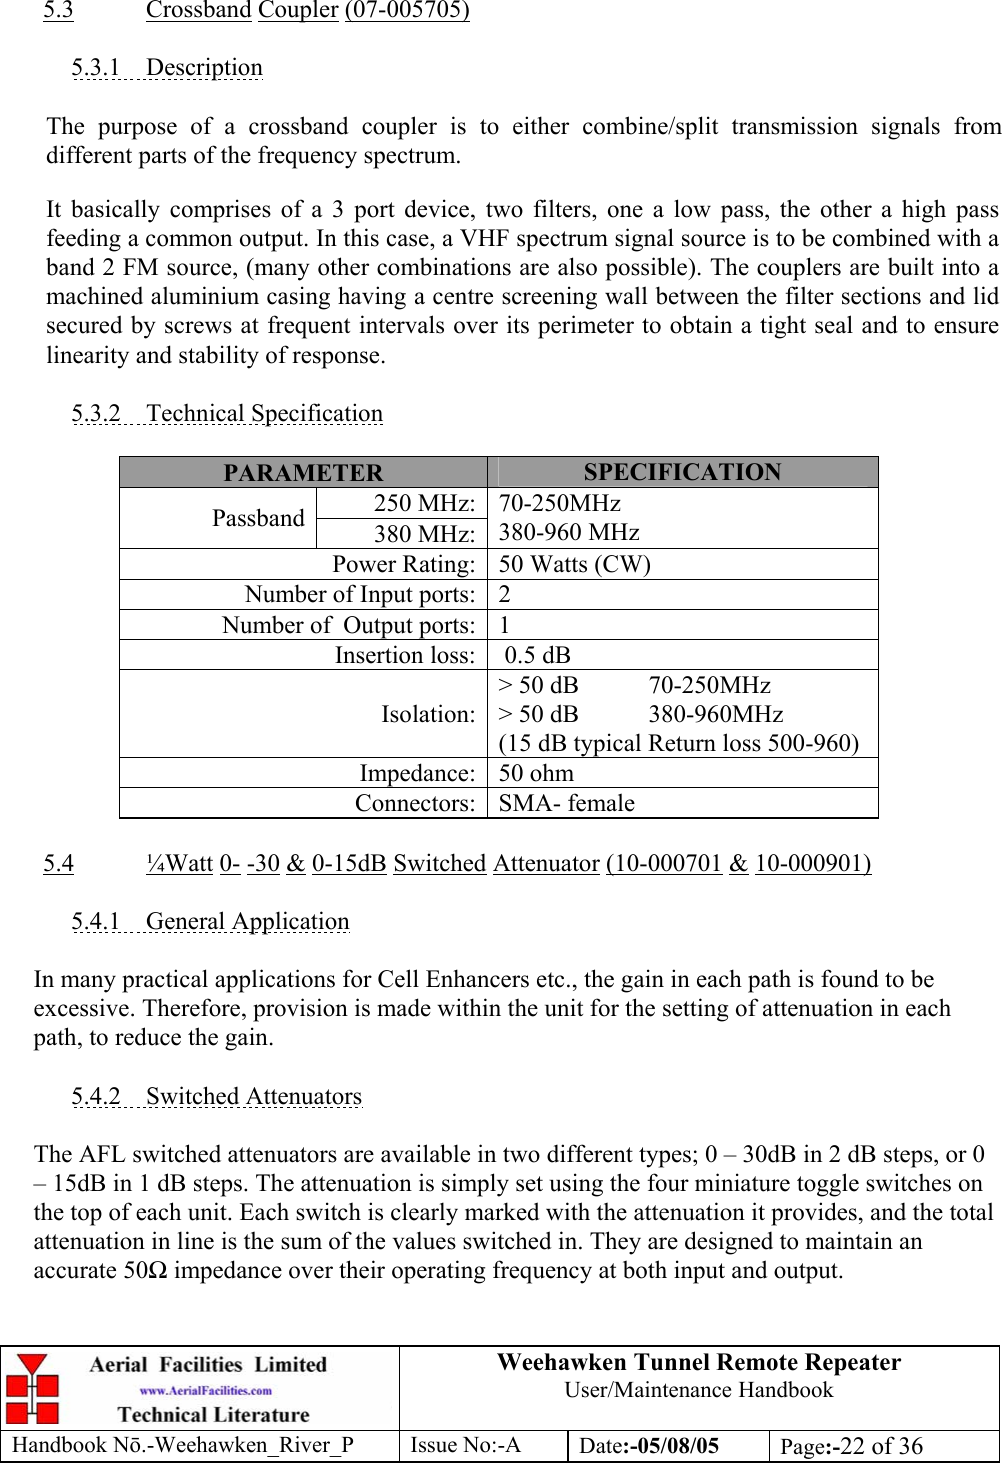 Weehawken Tunnel Remote Repeater User/Maintenance Handbook Handbook Nō.-Weehawken_River_P Issue No:-A Date:-05/08/05  Page:-22 of 36    5.3 Crossband Coupler (07-005705)  5.3.1 Description  The purpose of a crossband coupler is to either combine/split transmission signals from different parts of the frequency spectrum. It basically comprises of a 3 port device, two filters, one a low pass, the other a high pass feeding a common output. In this case, a VHF spectrum signal source is to be combined with a band 2 FM source, (many other combinations are also possible). The couplers are built into a machined aluminium casing having a centre screening wall between the filter sections and lid secured by screws at frequent intervals over its perimeter to obtain a tight seal and to ensure linearity and stability of response.  5.3.2 Technical Specification  PARAMETER  SPECIFICATION 250 MHz:Passband  380 MHz:70-250MHz 380-960 MHz Power Rating: 50 Watts (CW) Number of Input ports: 2 Number of  Output ports: 1 Insertion loss:  0.5 dB Isolation:&gt; 50 dB  70-250MHz &gt; 50 dB  380-960MHz (15 dB typical Return loss 500-960) Impedance: 50 ohm Connectors: SMA- female  5.4 ¼Watt 0- -30 &amp; 0-15dB Switched Attenuator (10-000701 &amp; 10-000901)  5.4.1 General Application  In many practical applications for Cell Enhancers etc., the gain in each path is found to be excessive. Therefore, provision is made within the unit for the setting of attenuation in each path, to reduce the gain.  5.4.2 Switched Attenuators  The AFL switched attenuators are available in two different types; 0 – 30dB in 2 dB steps, or 0 – 15dB in 1 dB steps. The attenuation is simply set using the four miniature toggle switches on the top of each unit. Each switch is clearly marked with the attenuation it provides, and the total attenuation in line is the sum of the values switched in. They are designed to maintain an accurate 50Ω impedance over their operating frequency at both input and output. 